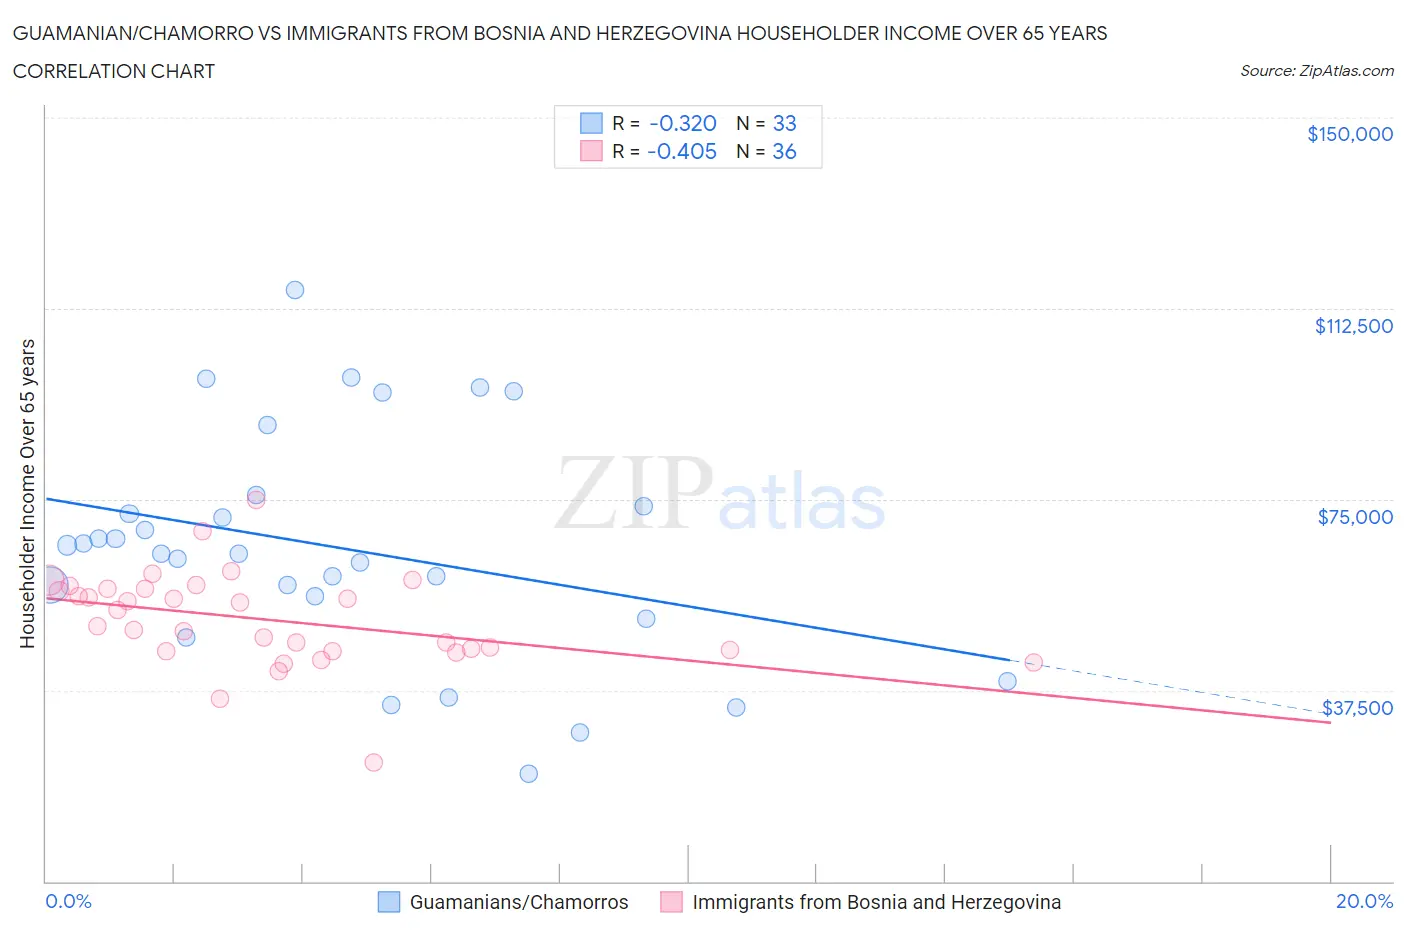 Guamanian/Chamorro vs Immigrants from Bosnia and Herzegovina Householder Income Over 65 years